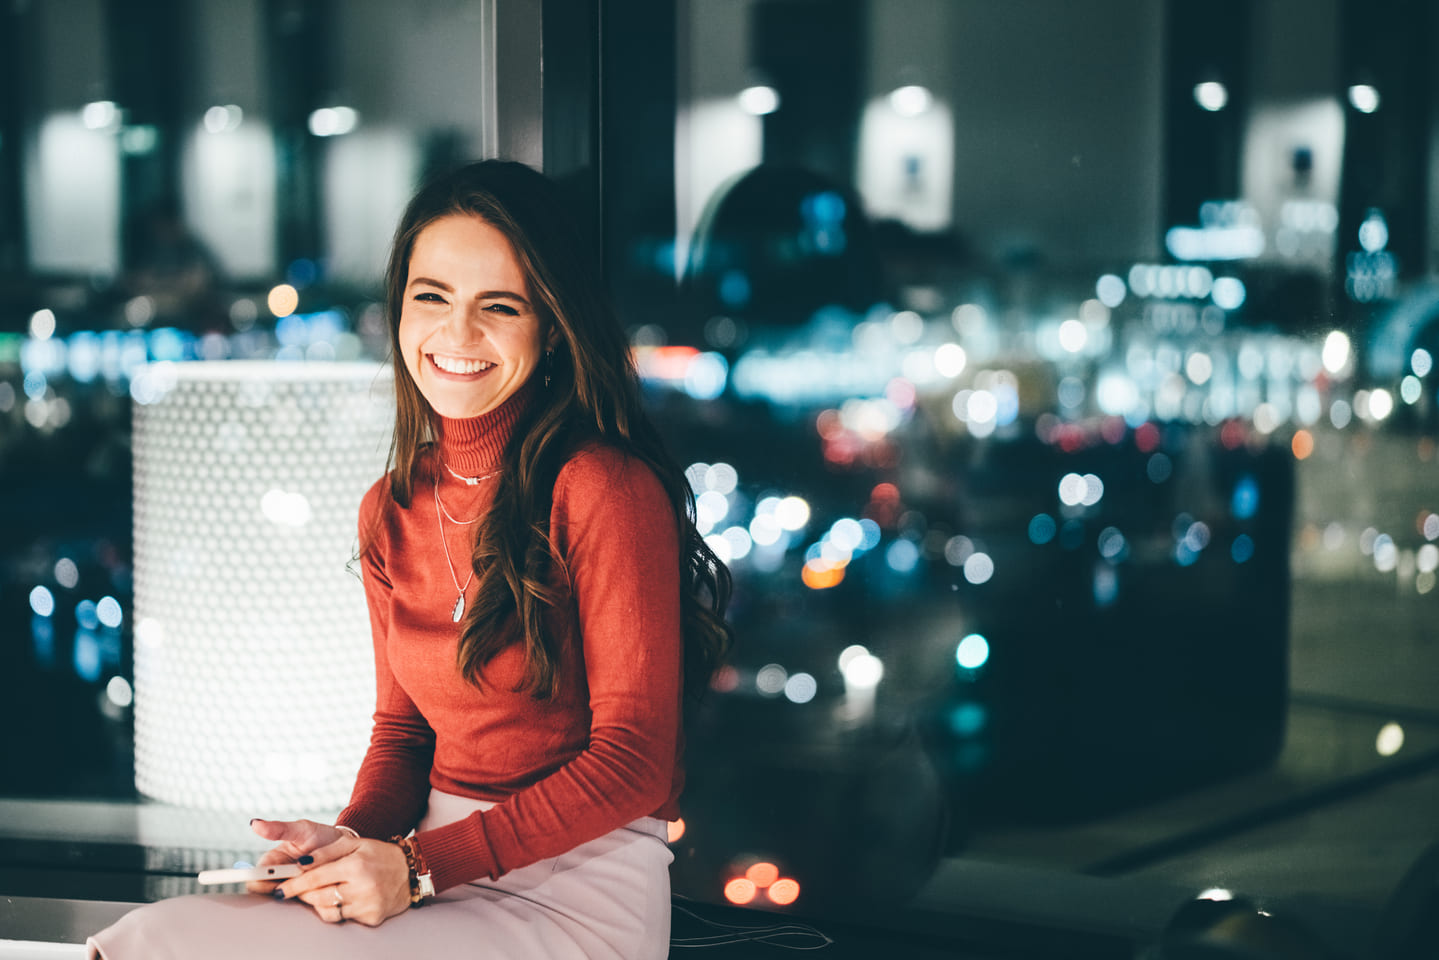 Portrait of a young woman, leaning against a window, city lights behind her, and holding a phone